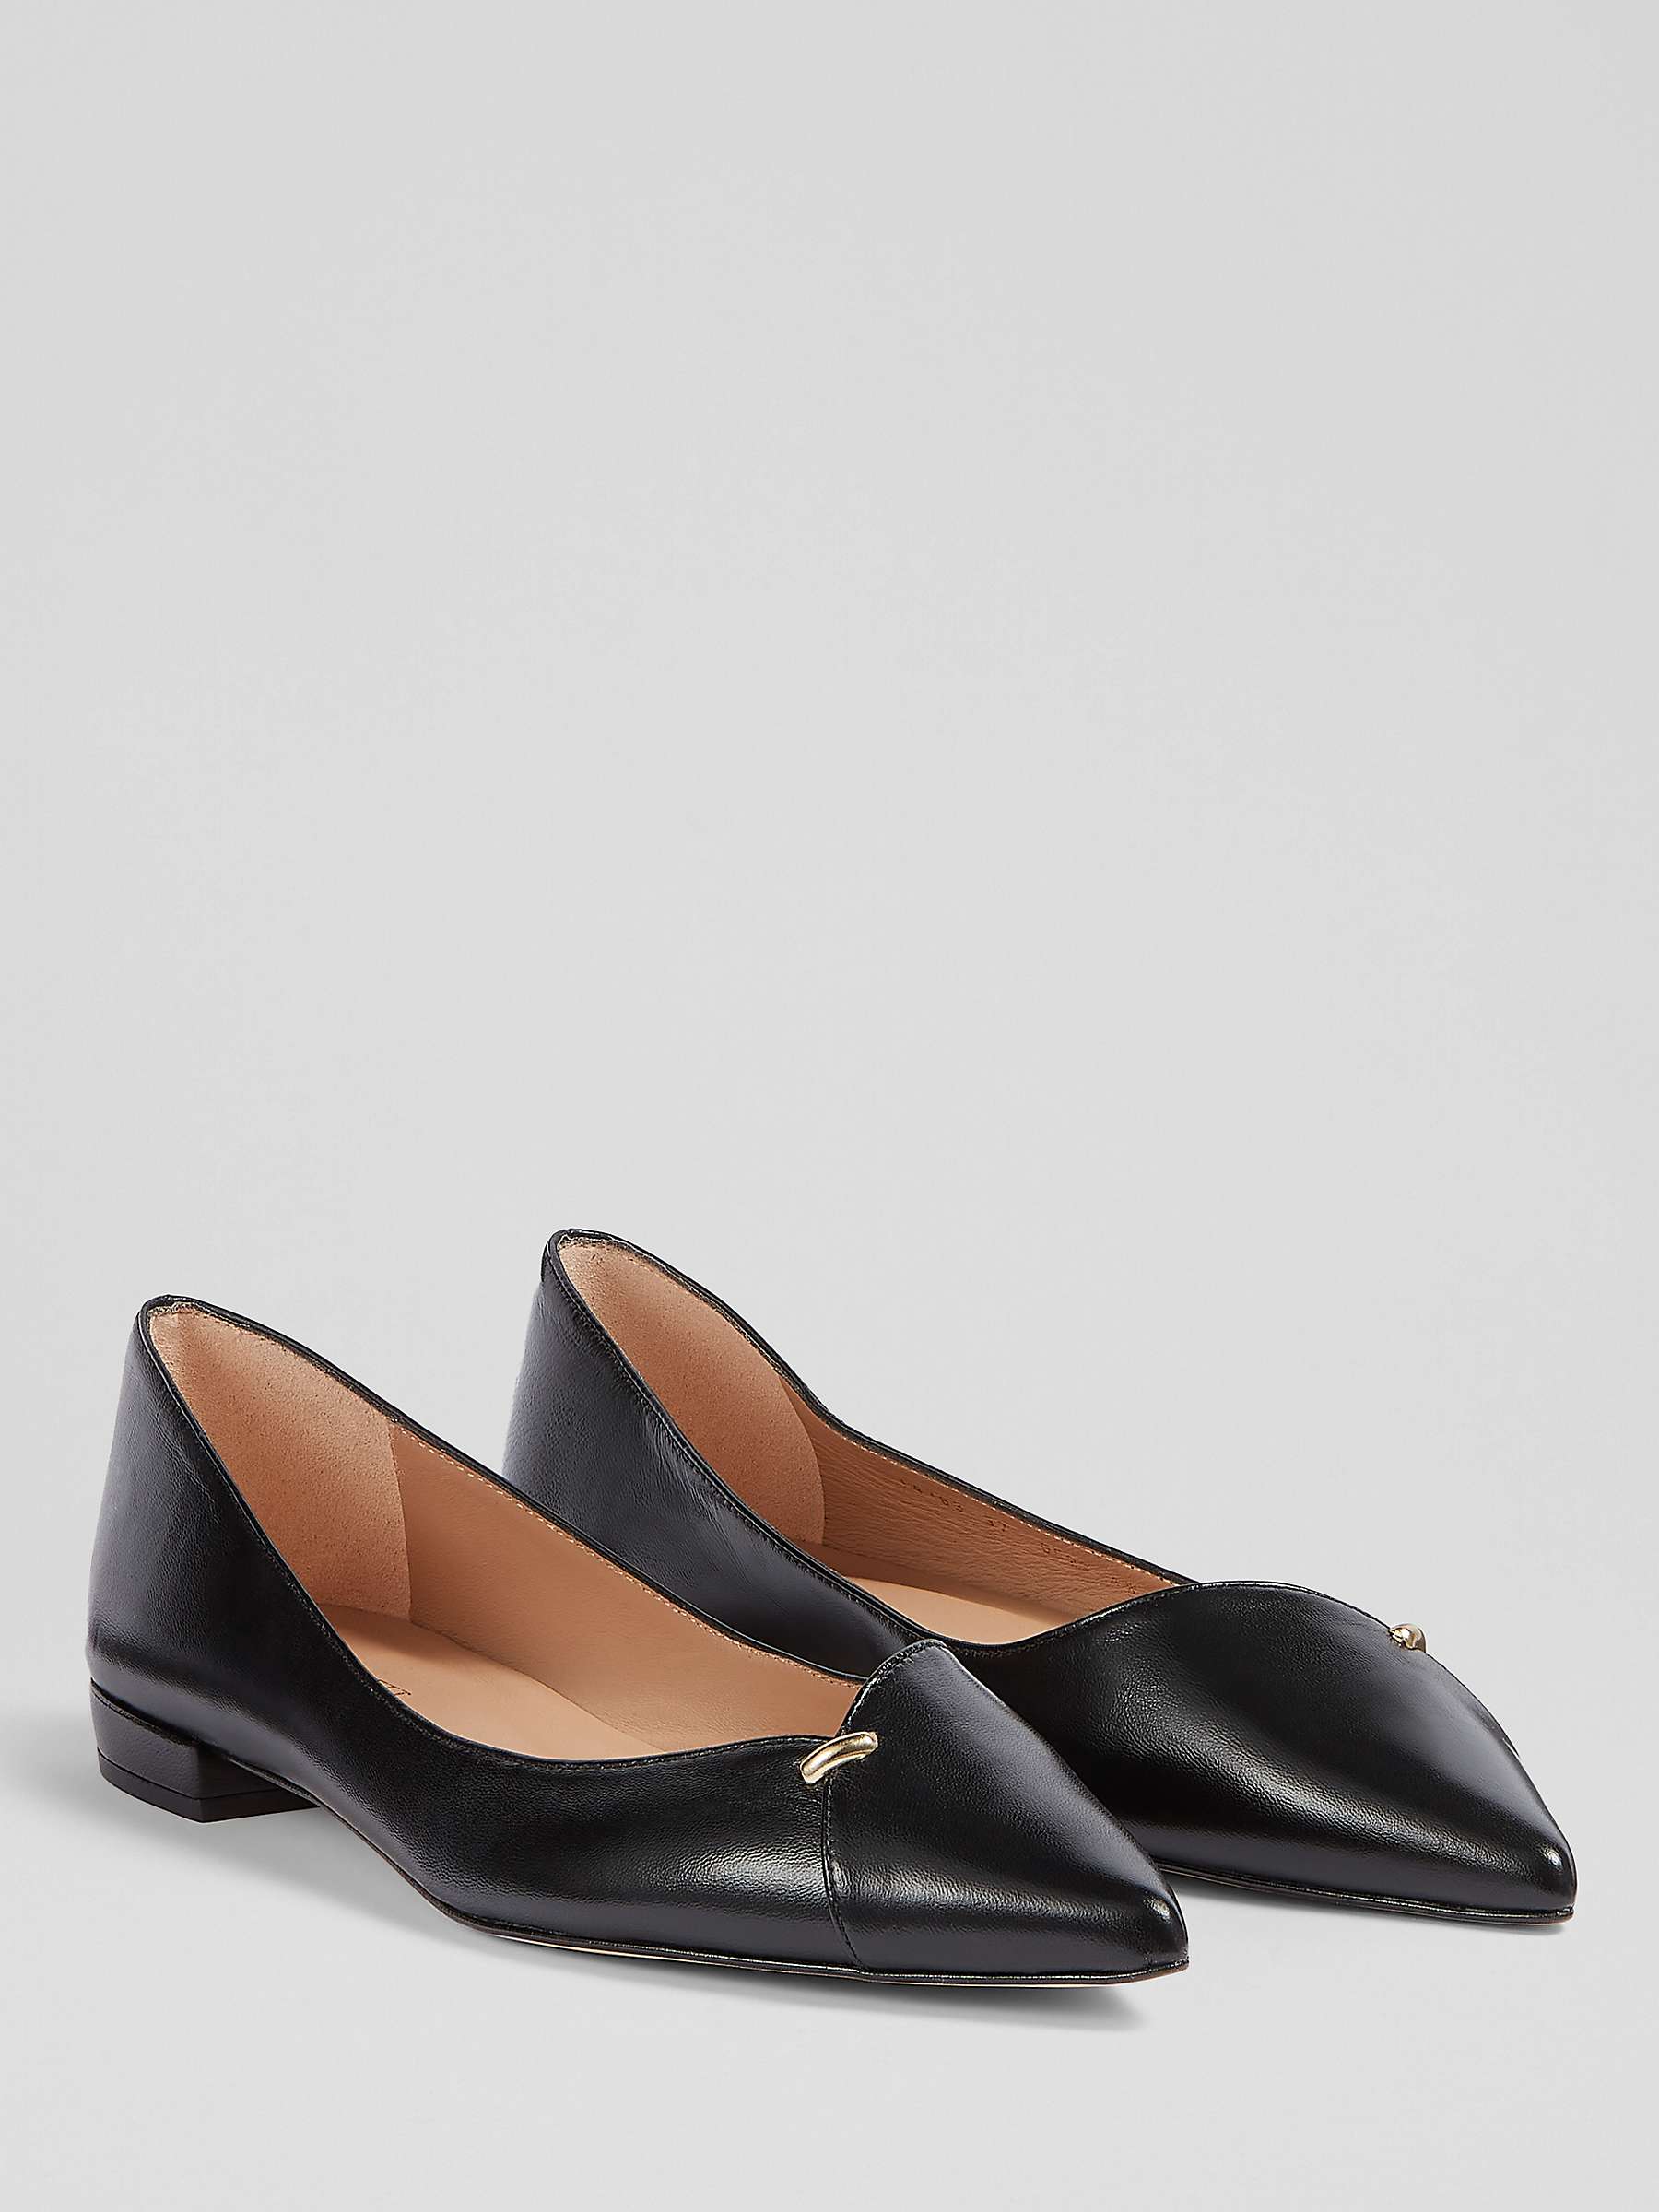 Buy L.K.Bennett Cally Pointed Toe Flats Online at johnlewis.com